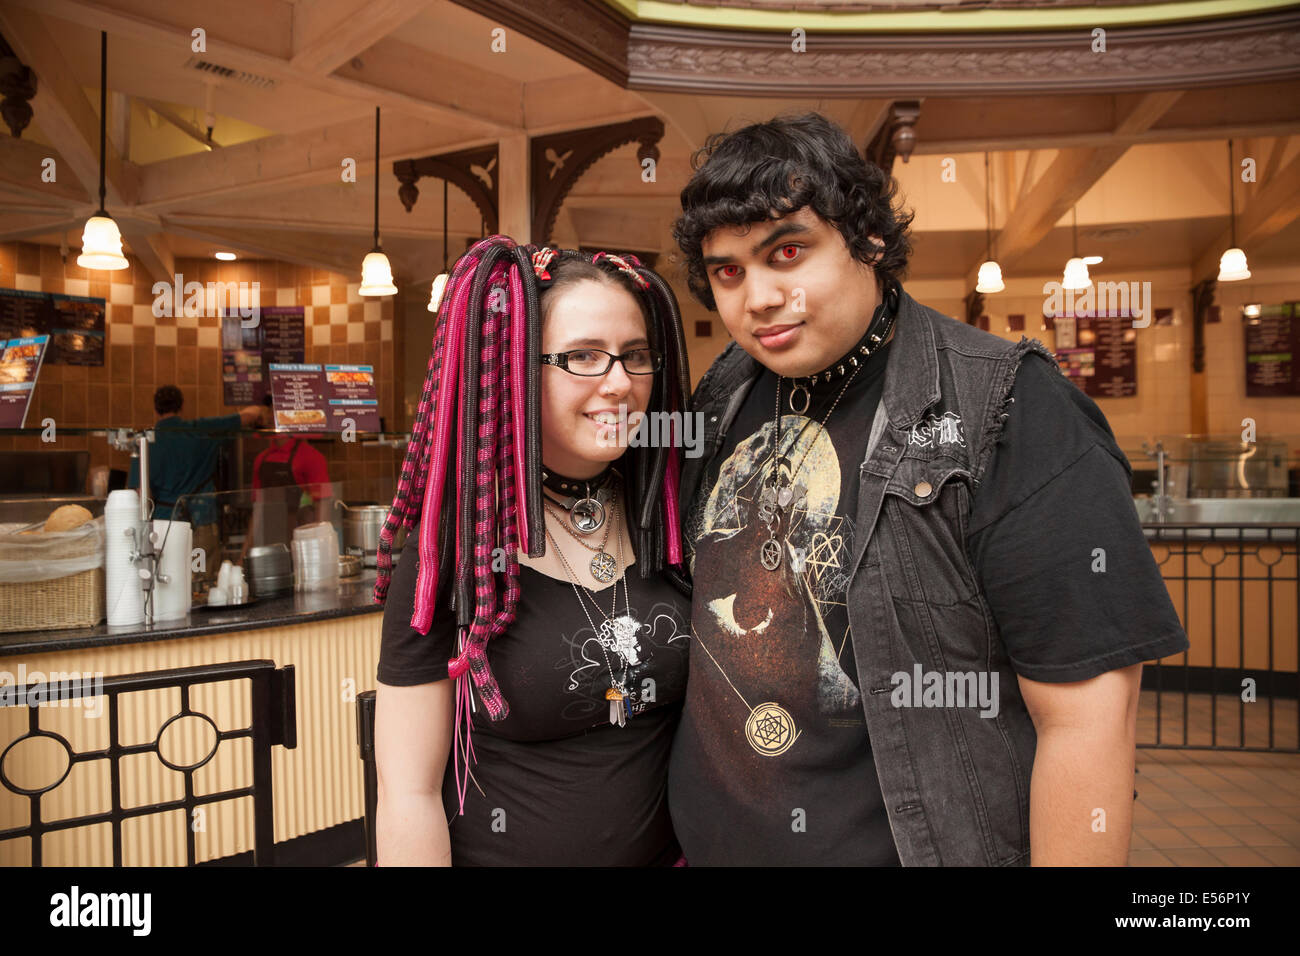 Goth couple wearing black clothing, studded jewelry, and piercings. Stock Photo